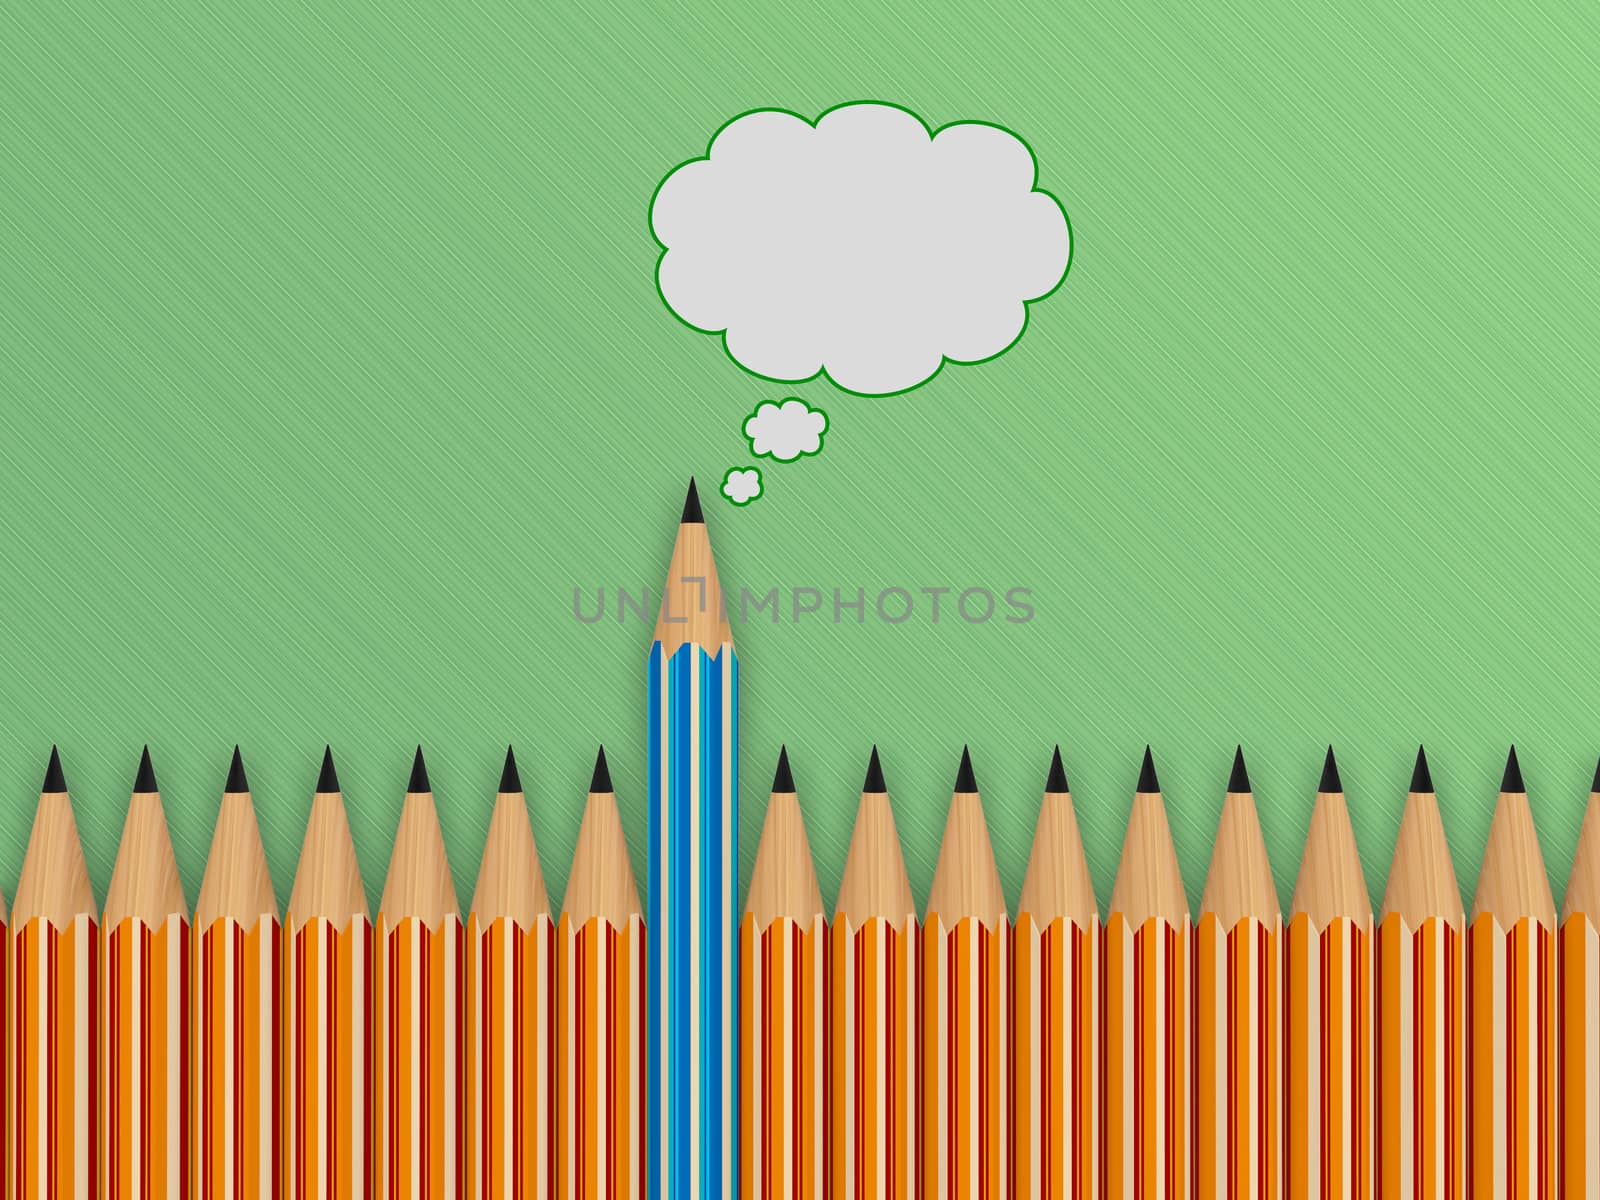 brightly colored pencils and speech bubble. concept of communica by motionkarma